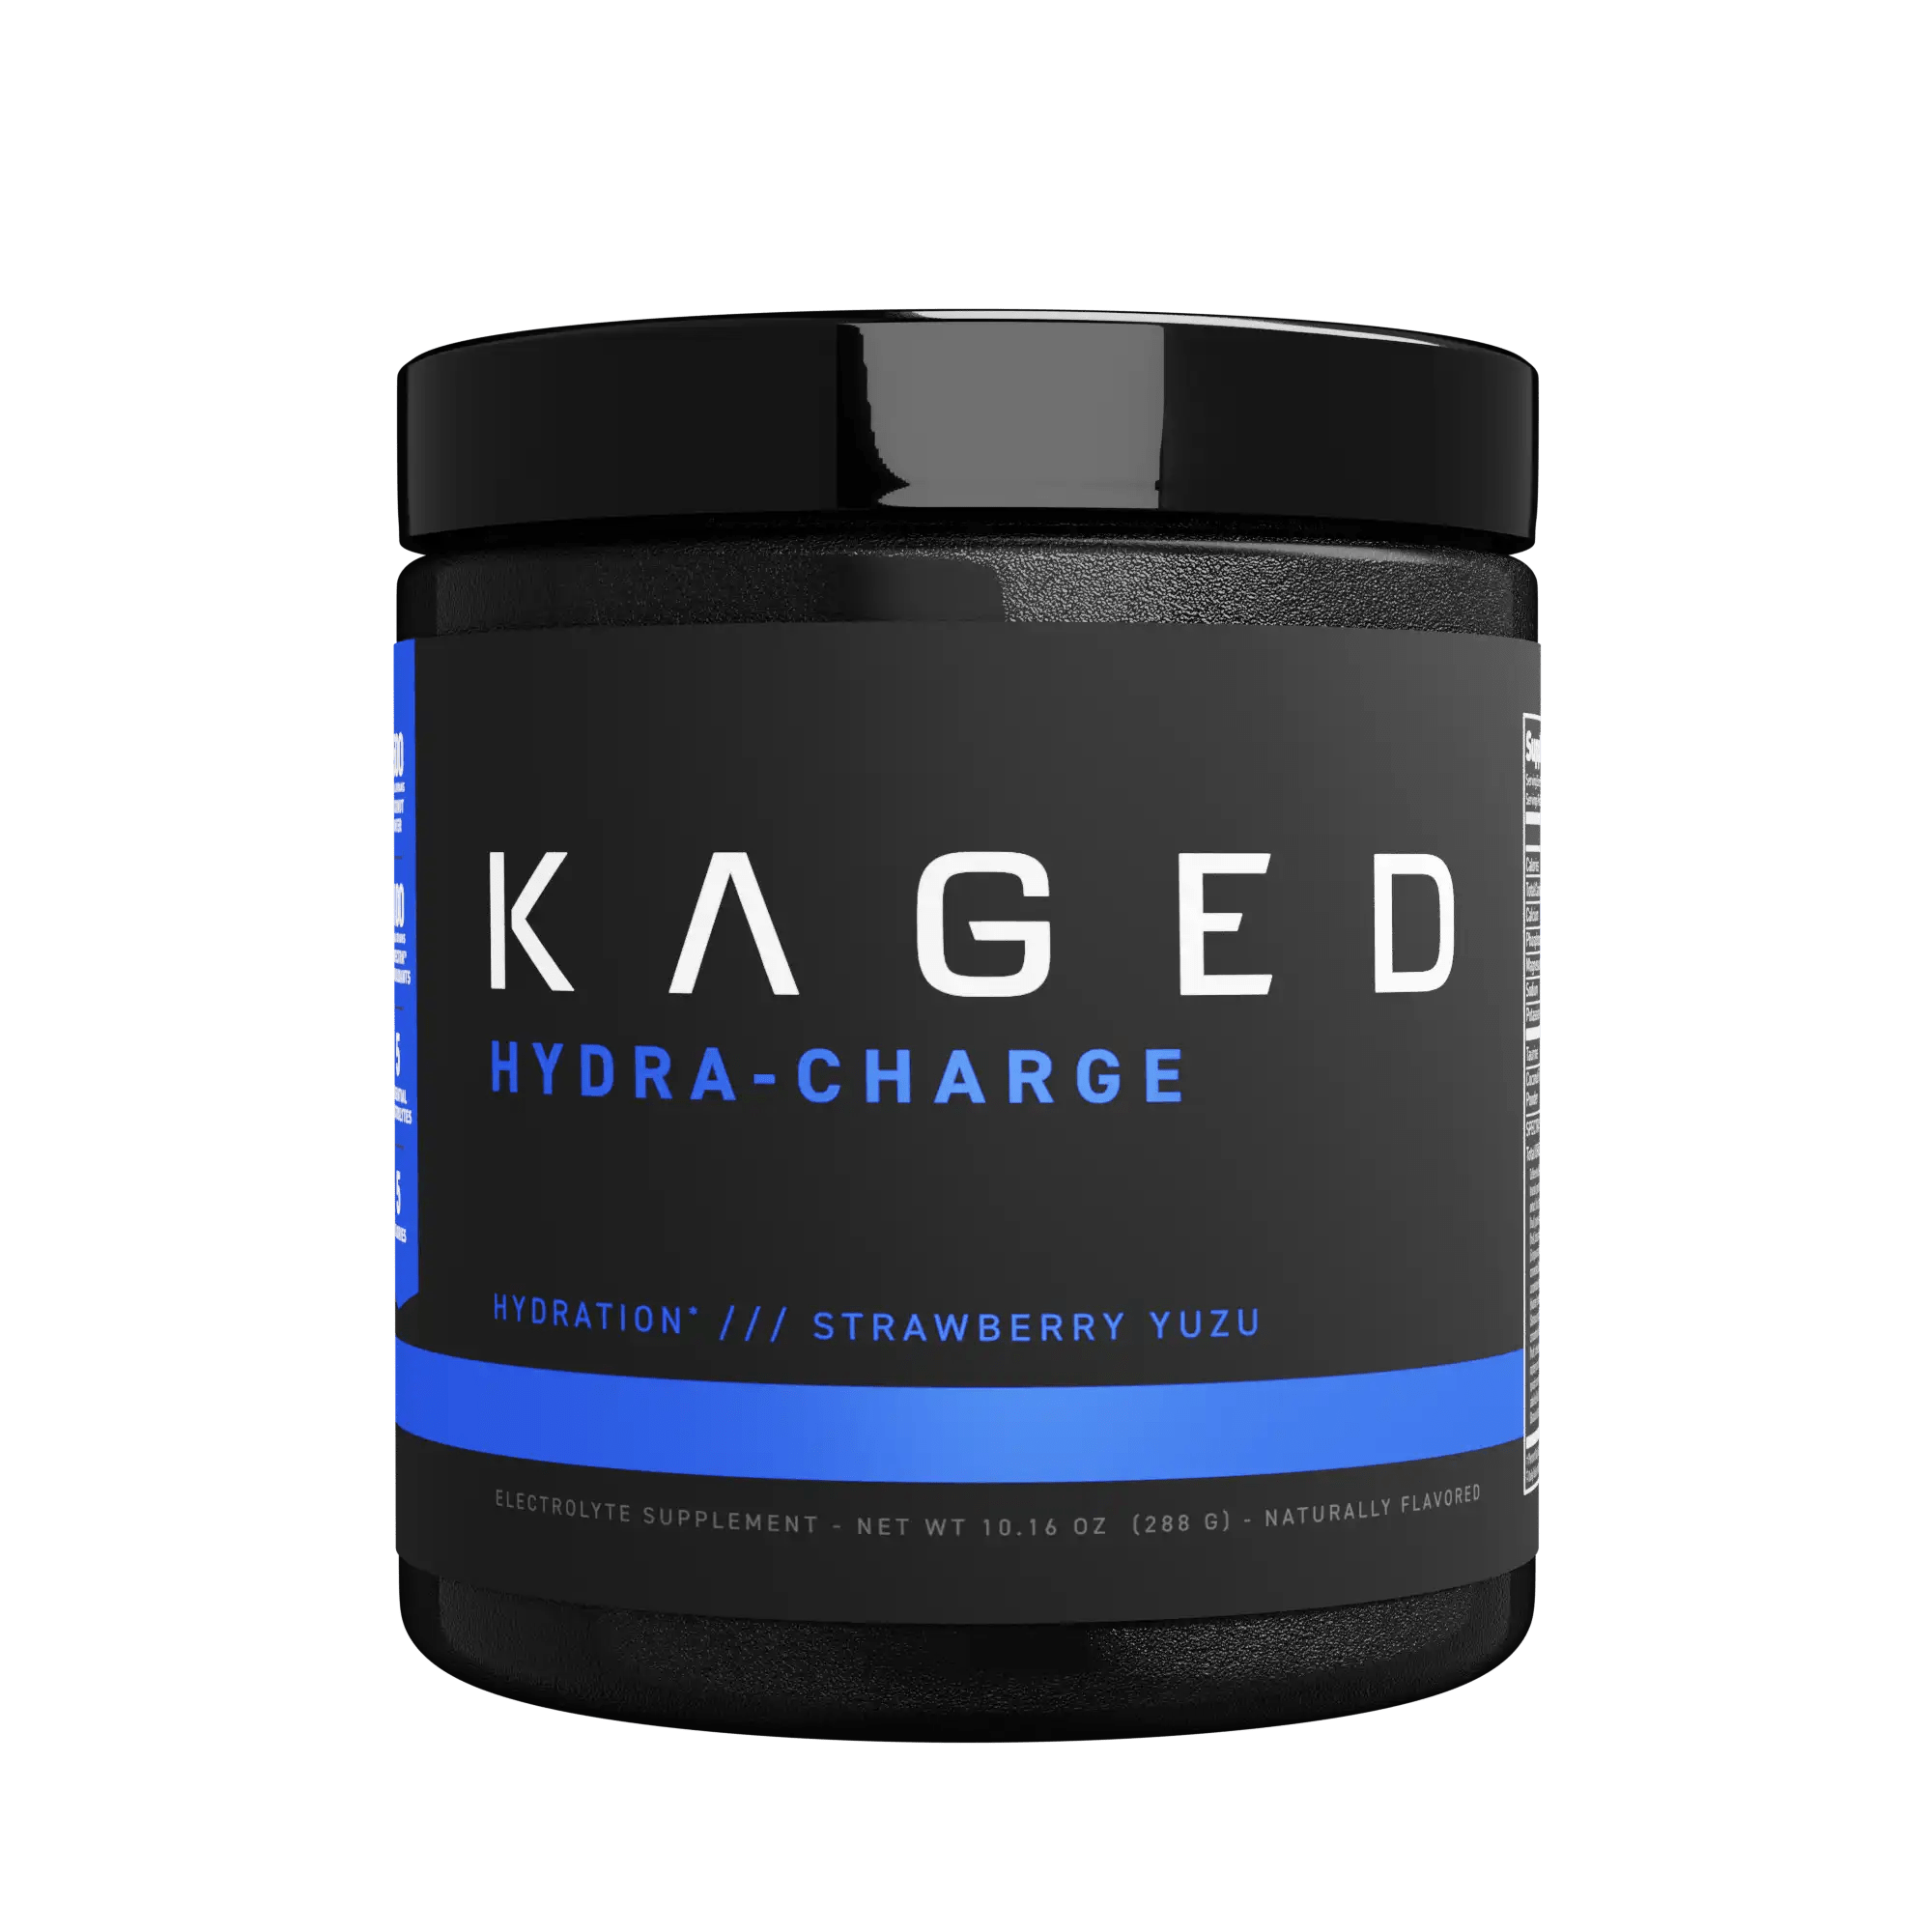 Kaged MuscleHydra-ChargeDaily Electrolyte DrinkRED SUPPS